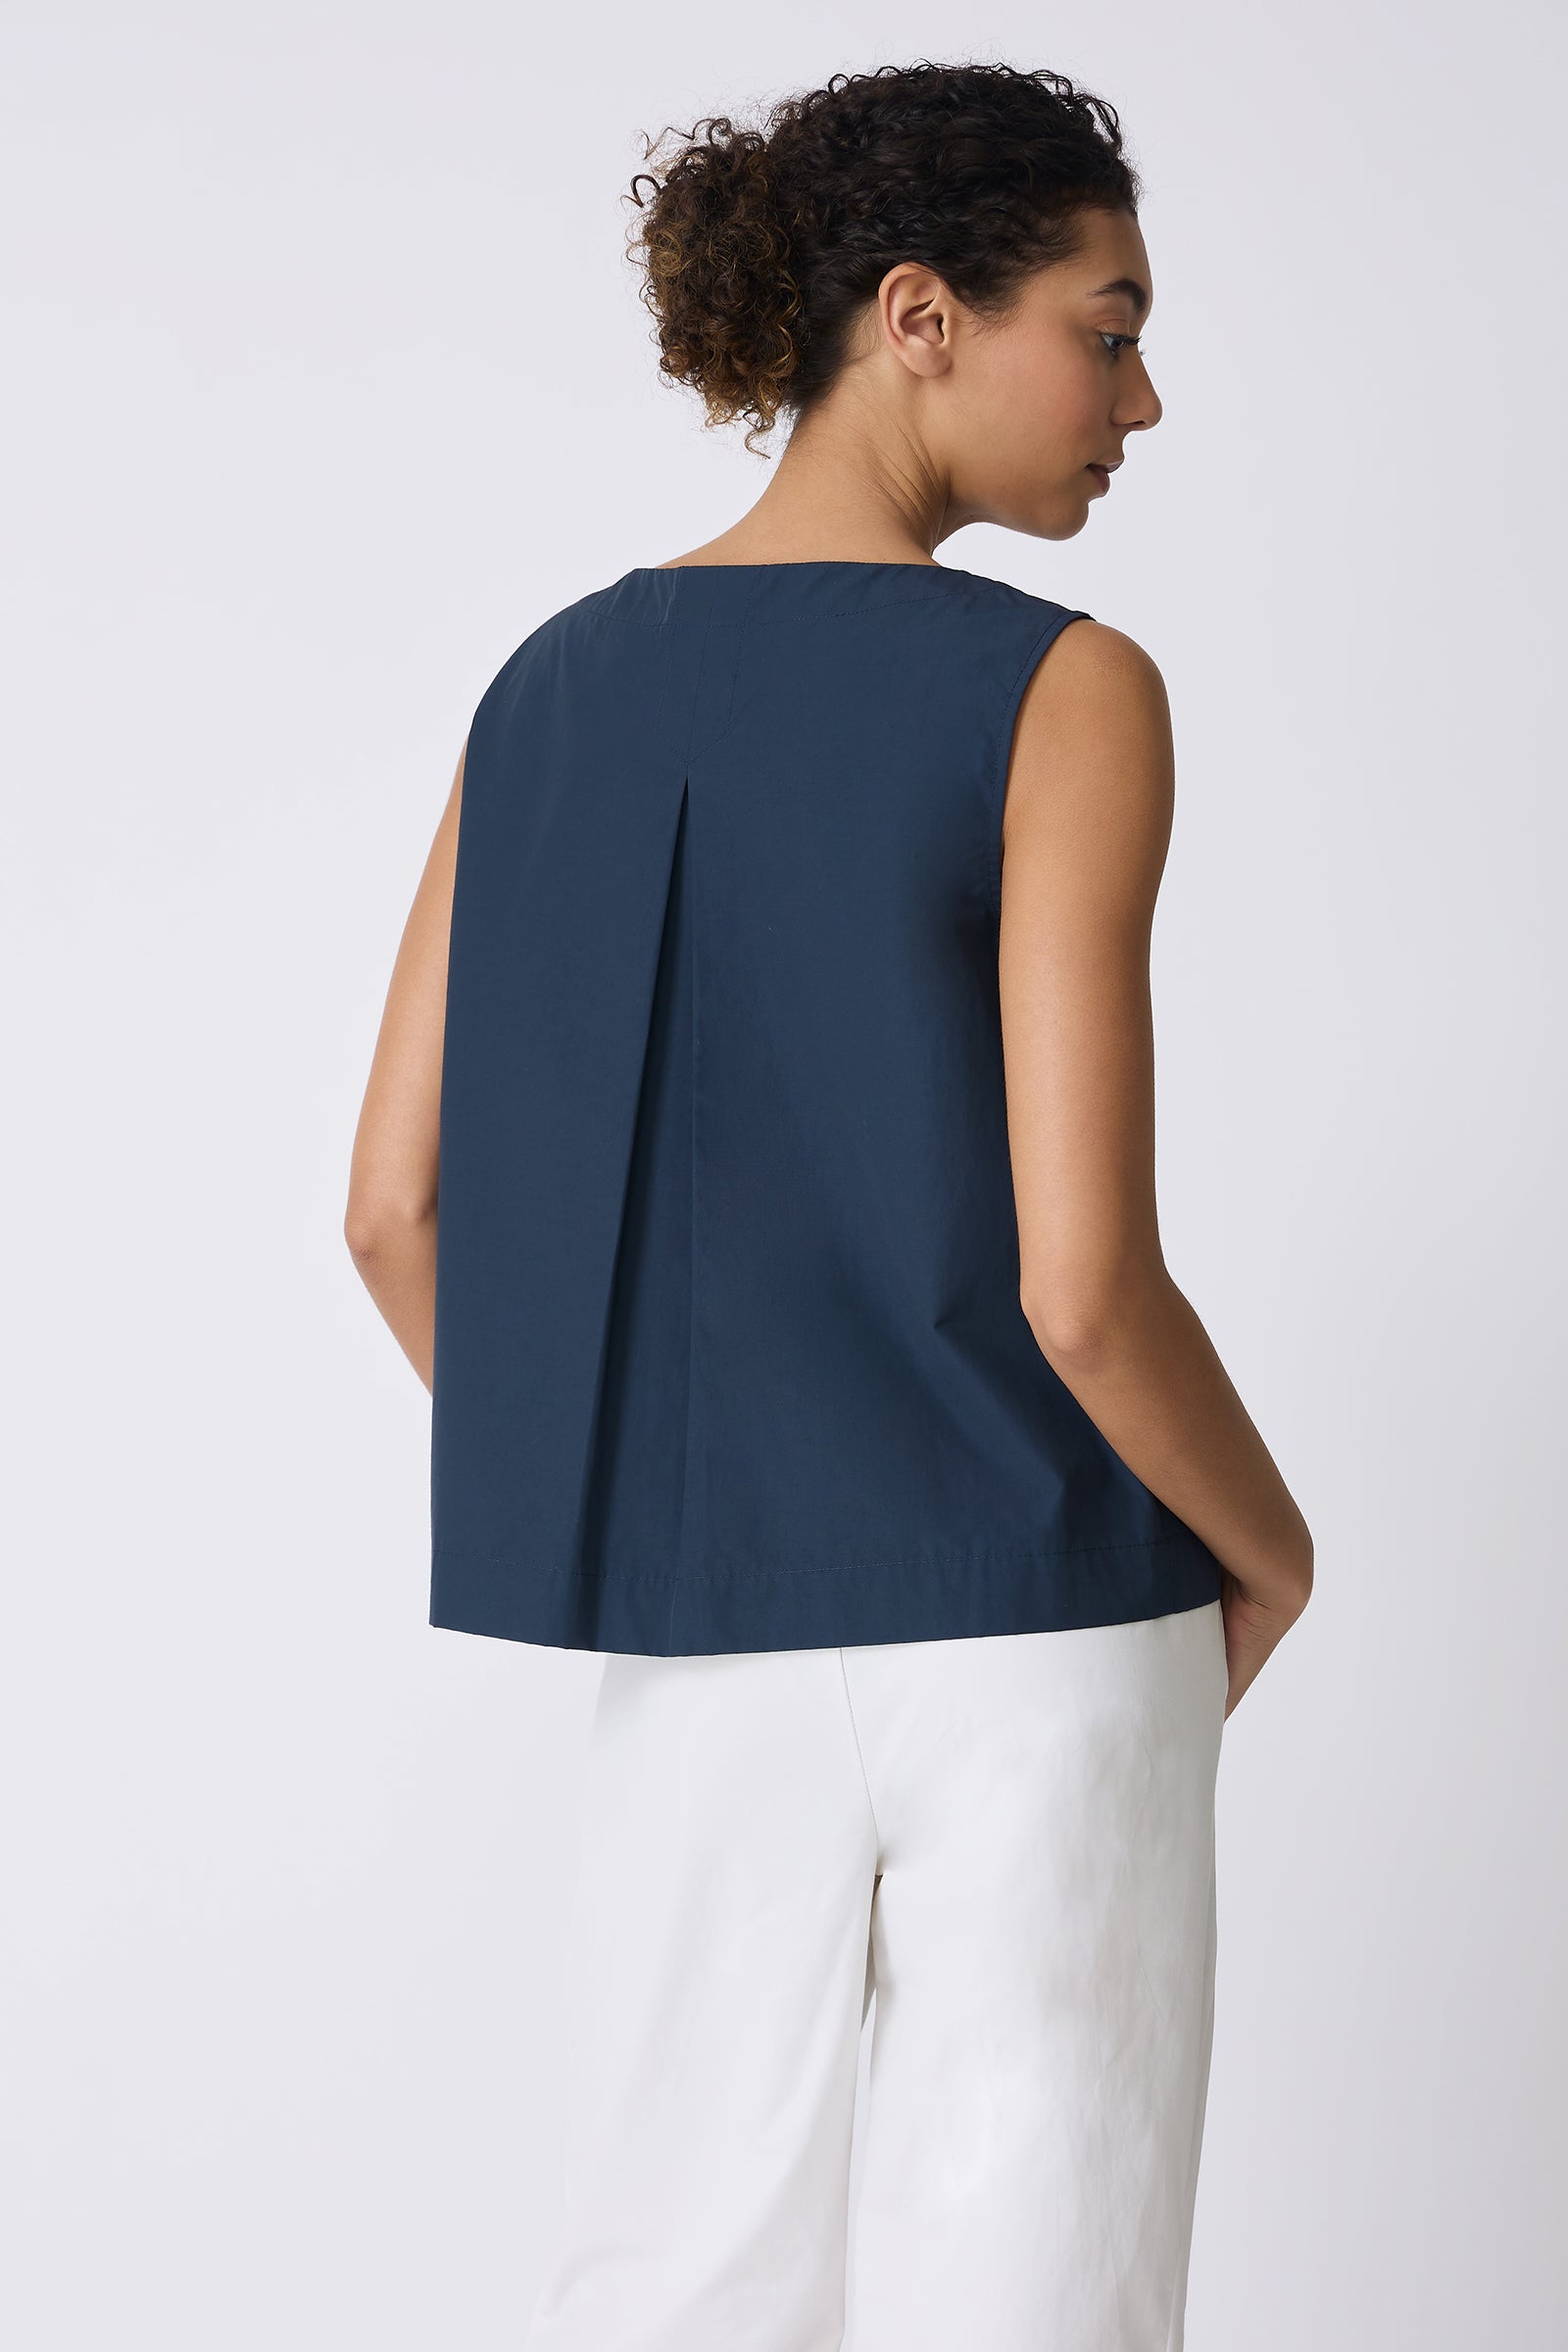 Kal Rieman Colette Shell in Summer Navy on model back view